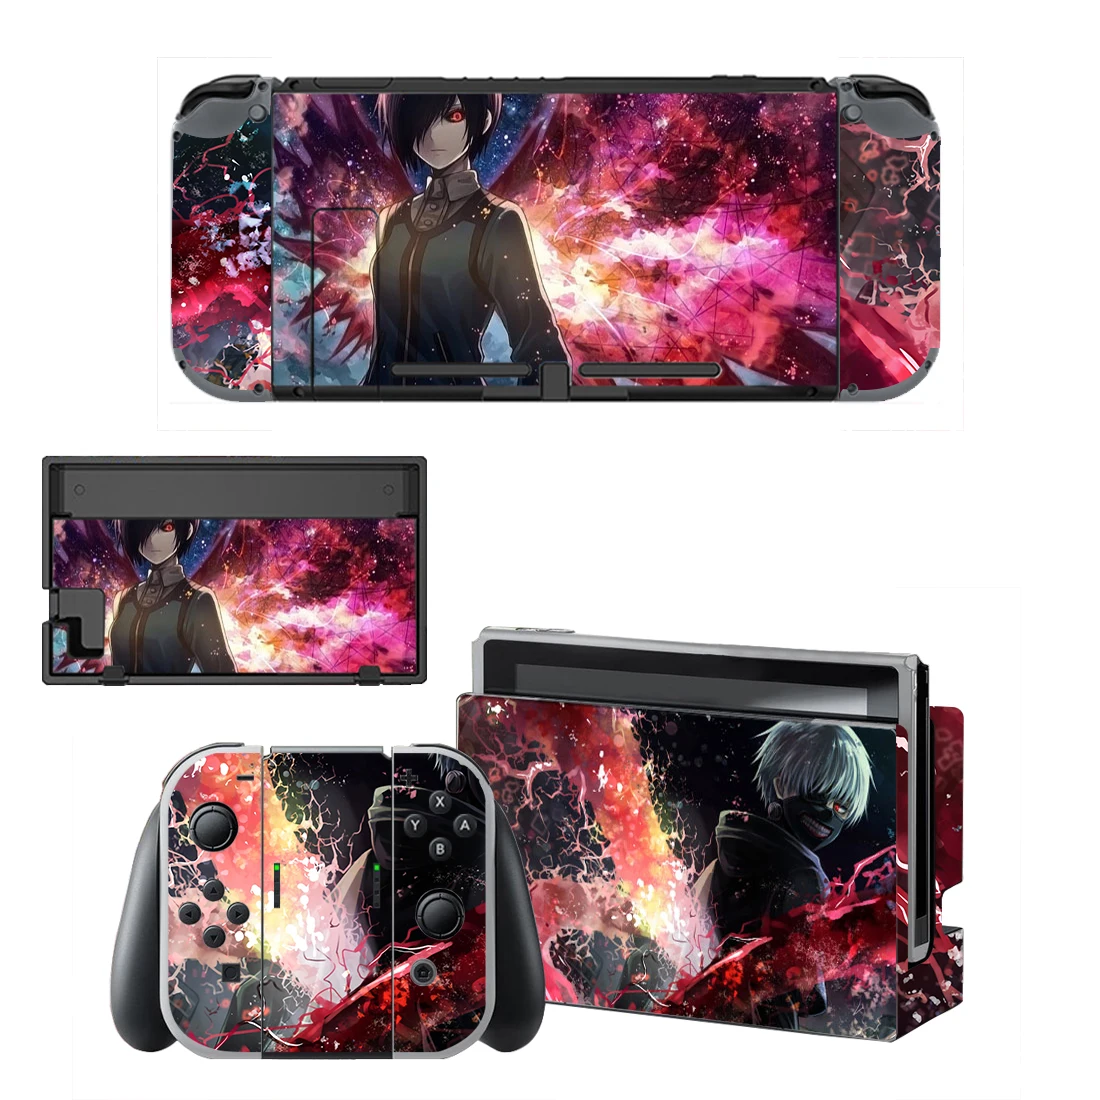 Tokyo Ghoul Nintendo Switch Skin Sticker NintendoSwitch stickers skins for Nintend Switch Console and Joy-Con Controller